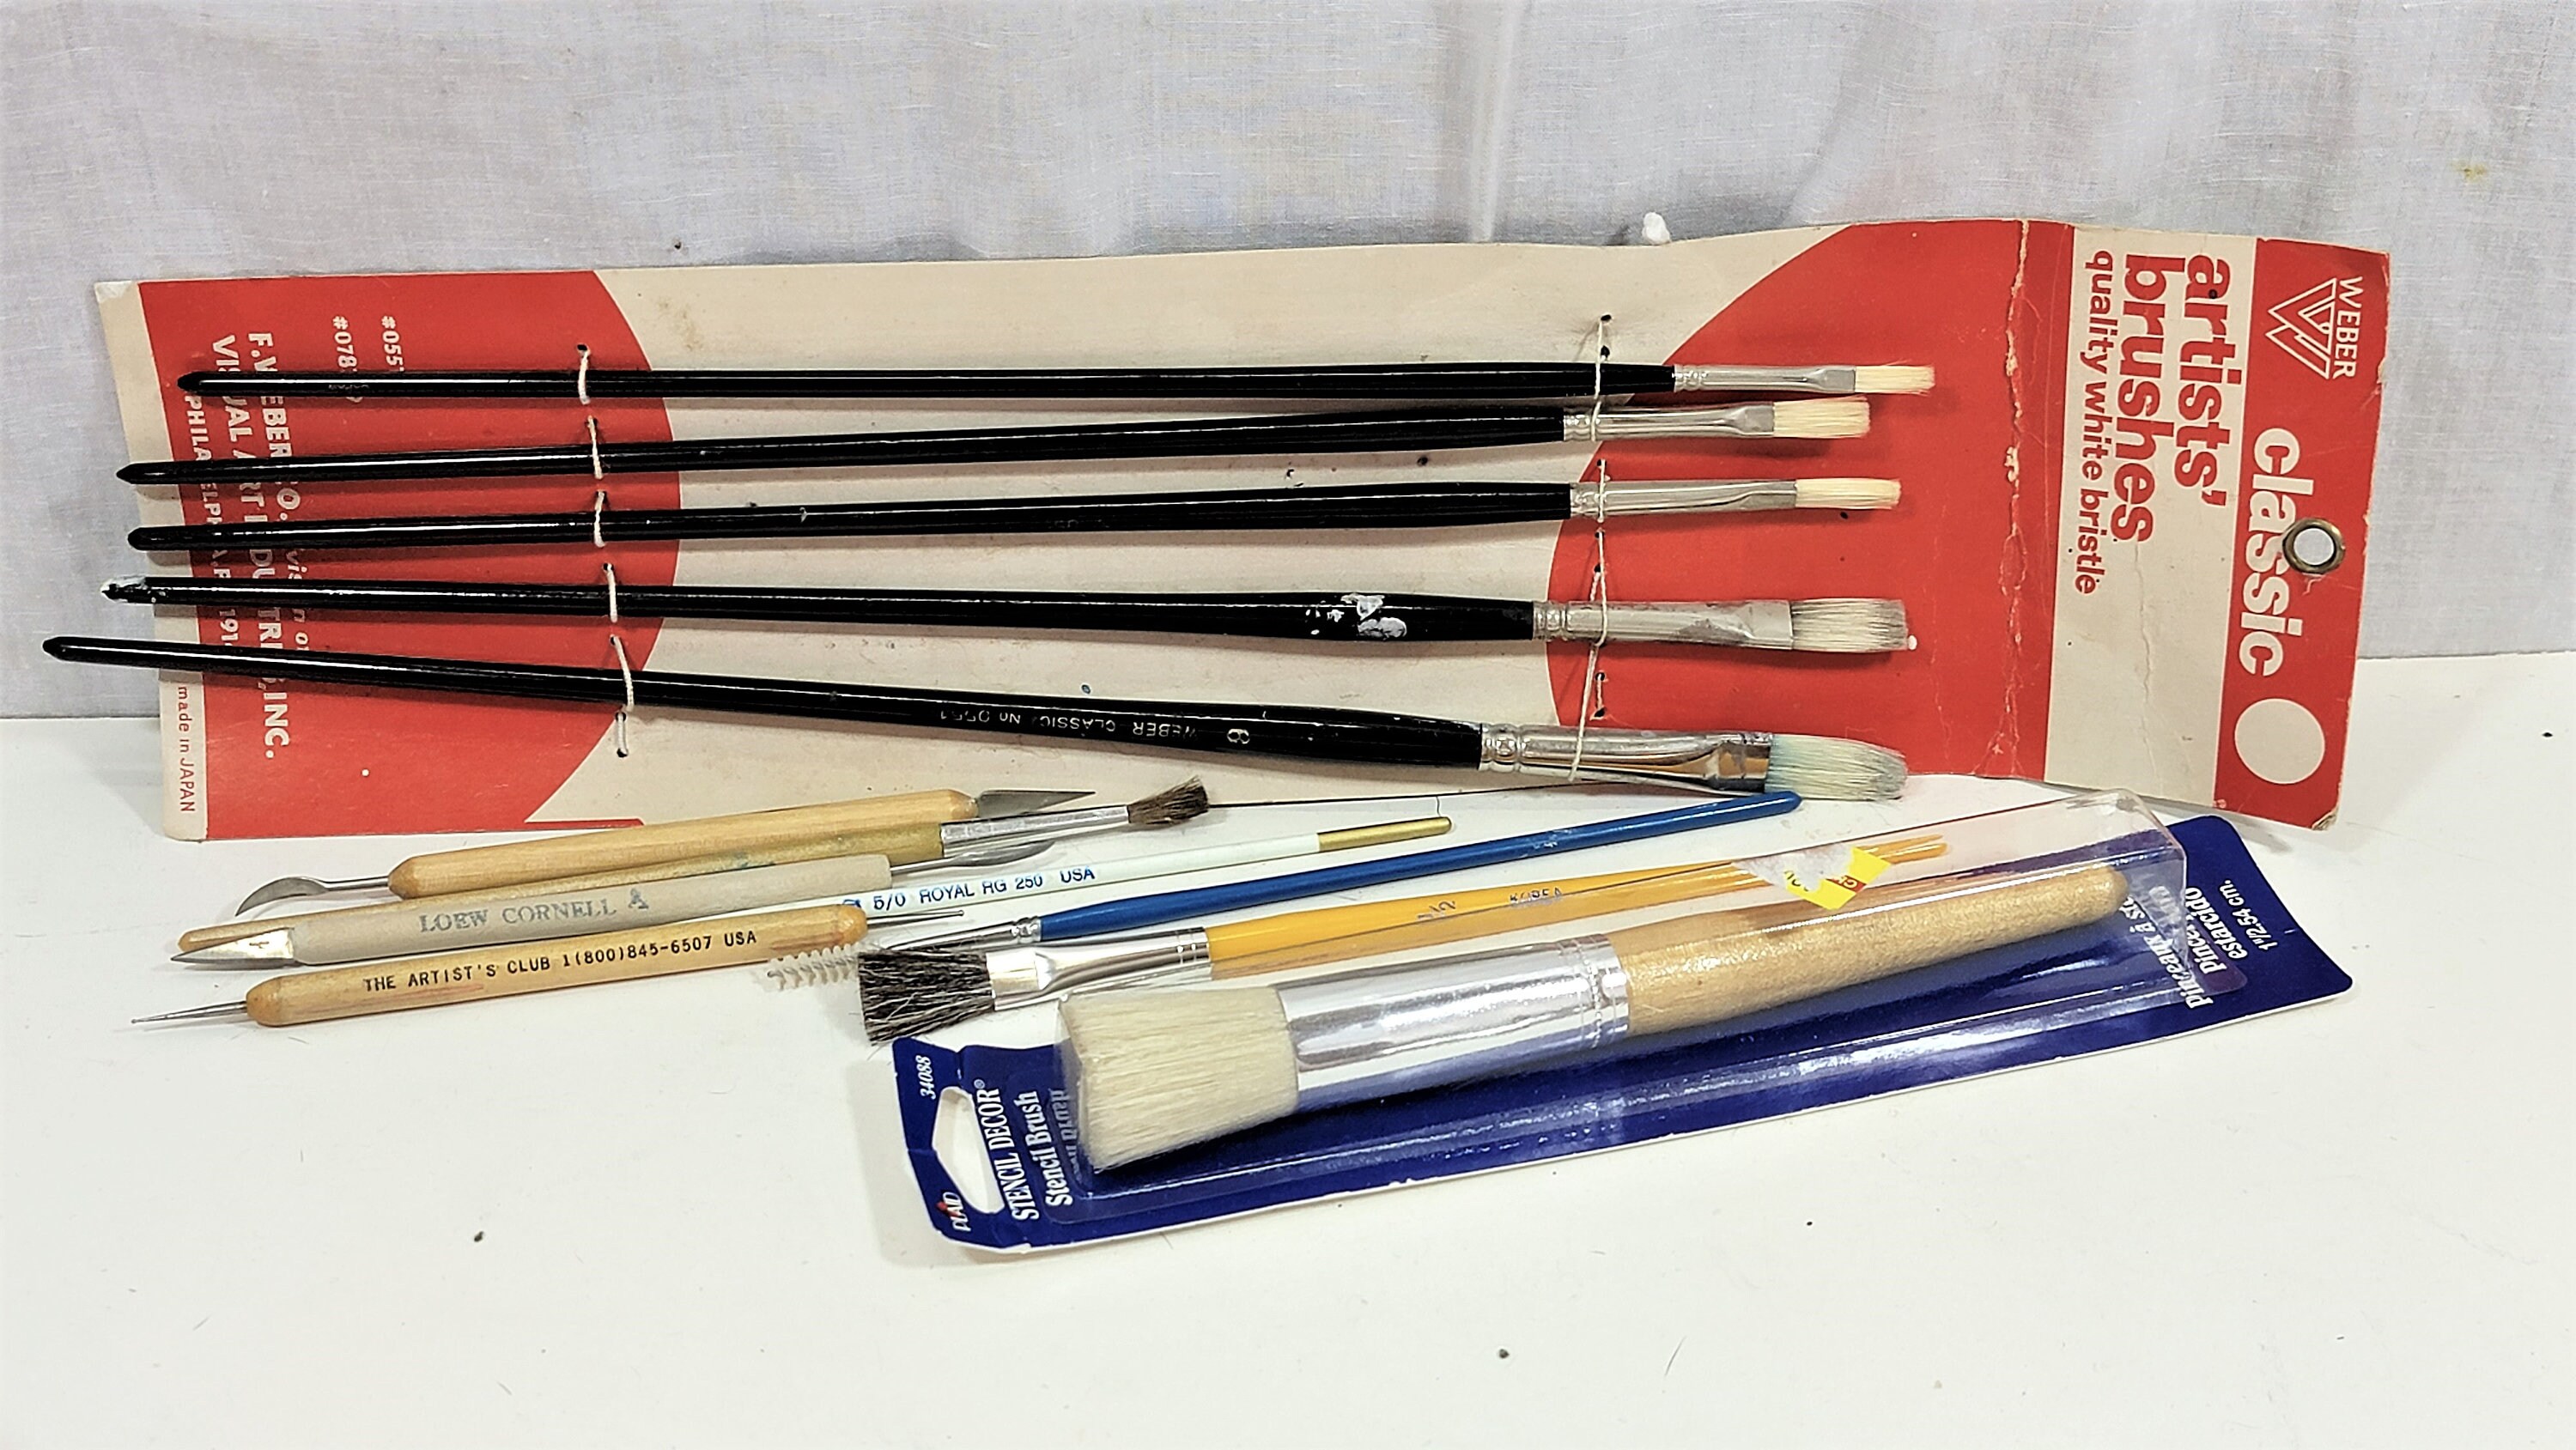 80s Vintage Paintbrushes / LOEW CORNELL Paint Brushes / Artist Materials /  Fine Art Painting / Craft Supplies / Set of 5 